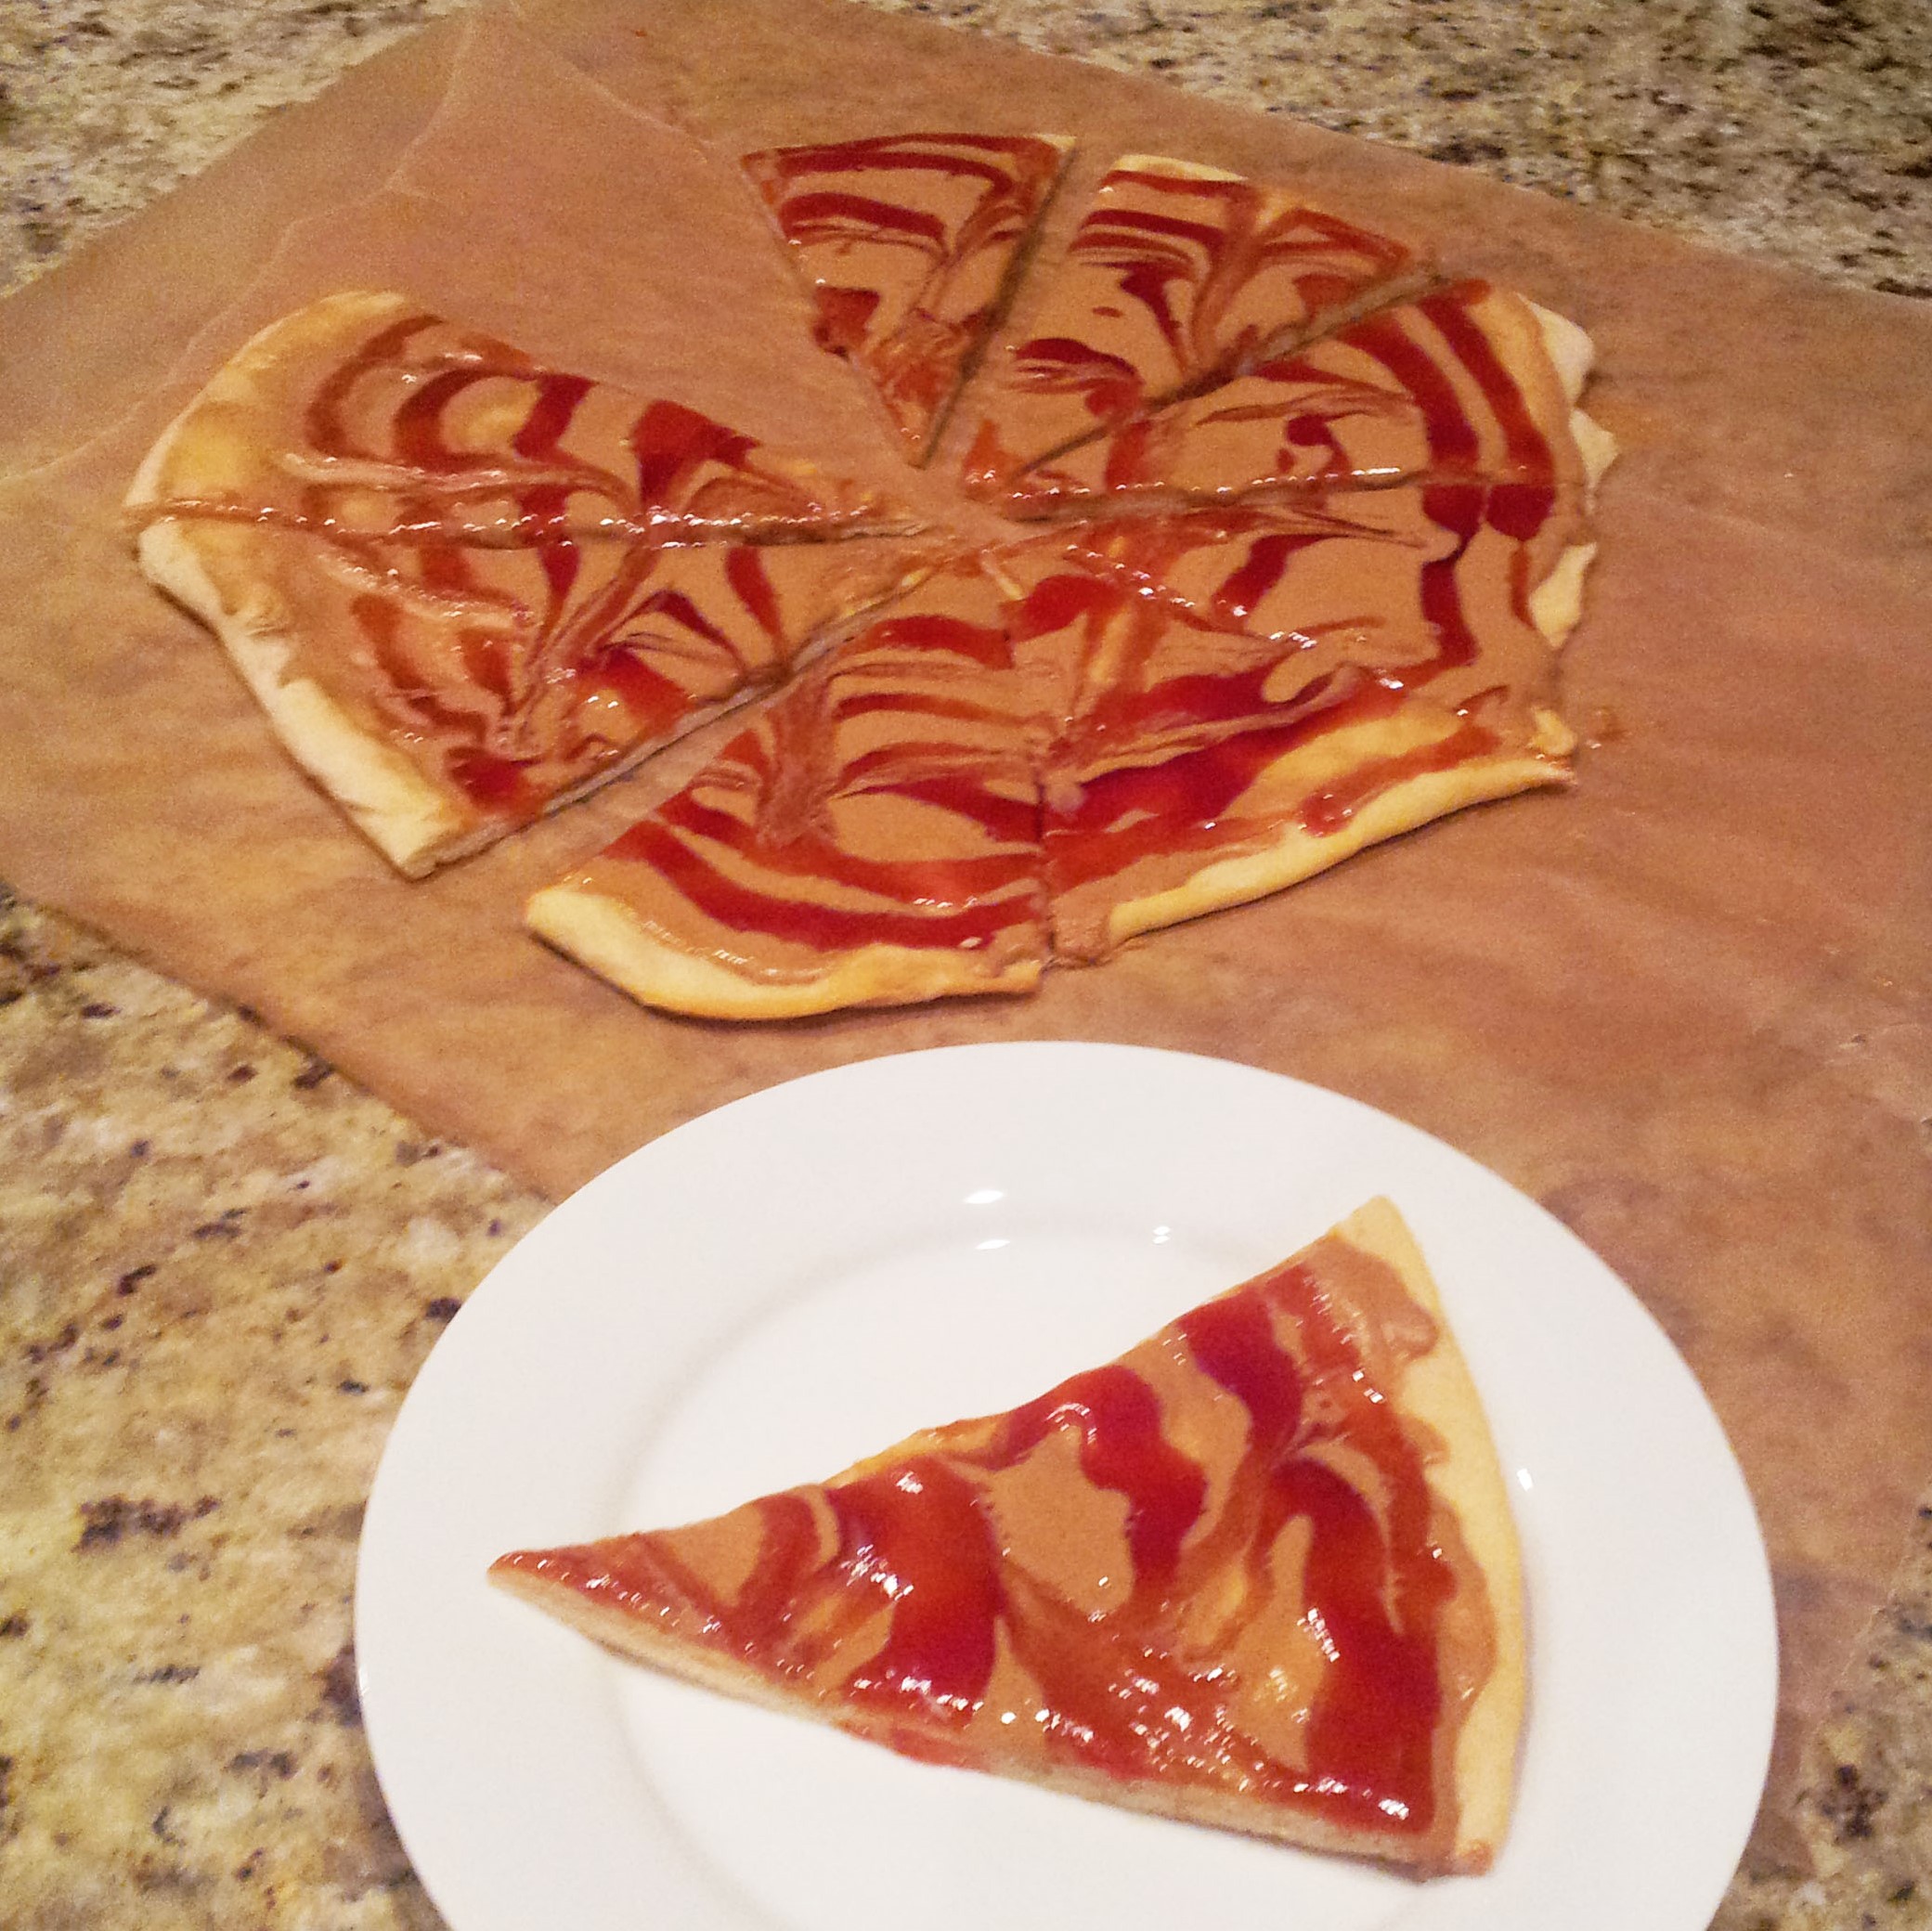 Goofy S Kitchen S Peanut Butter And Jelly Pizza Rumbly In My Tumbly